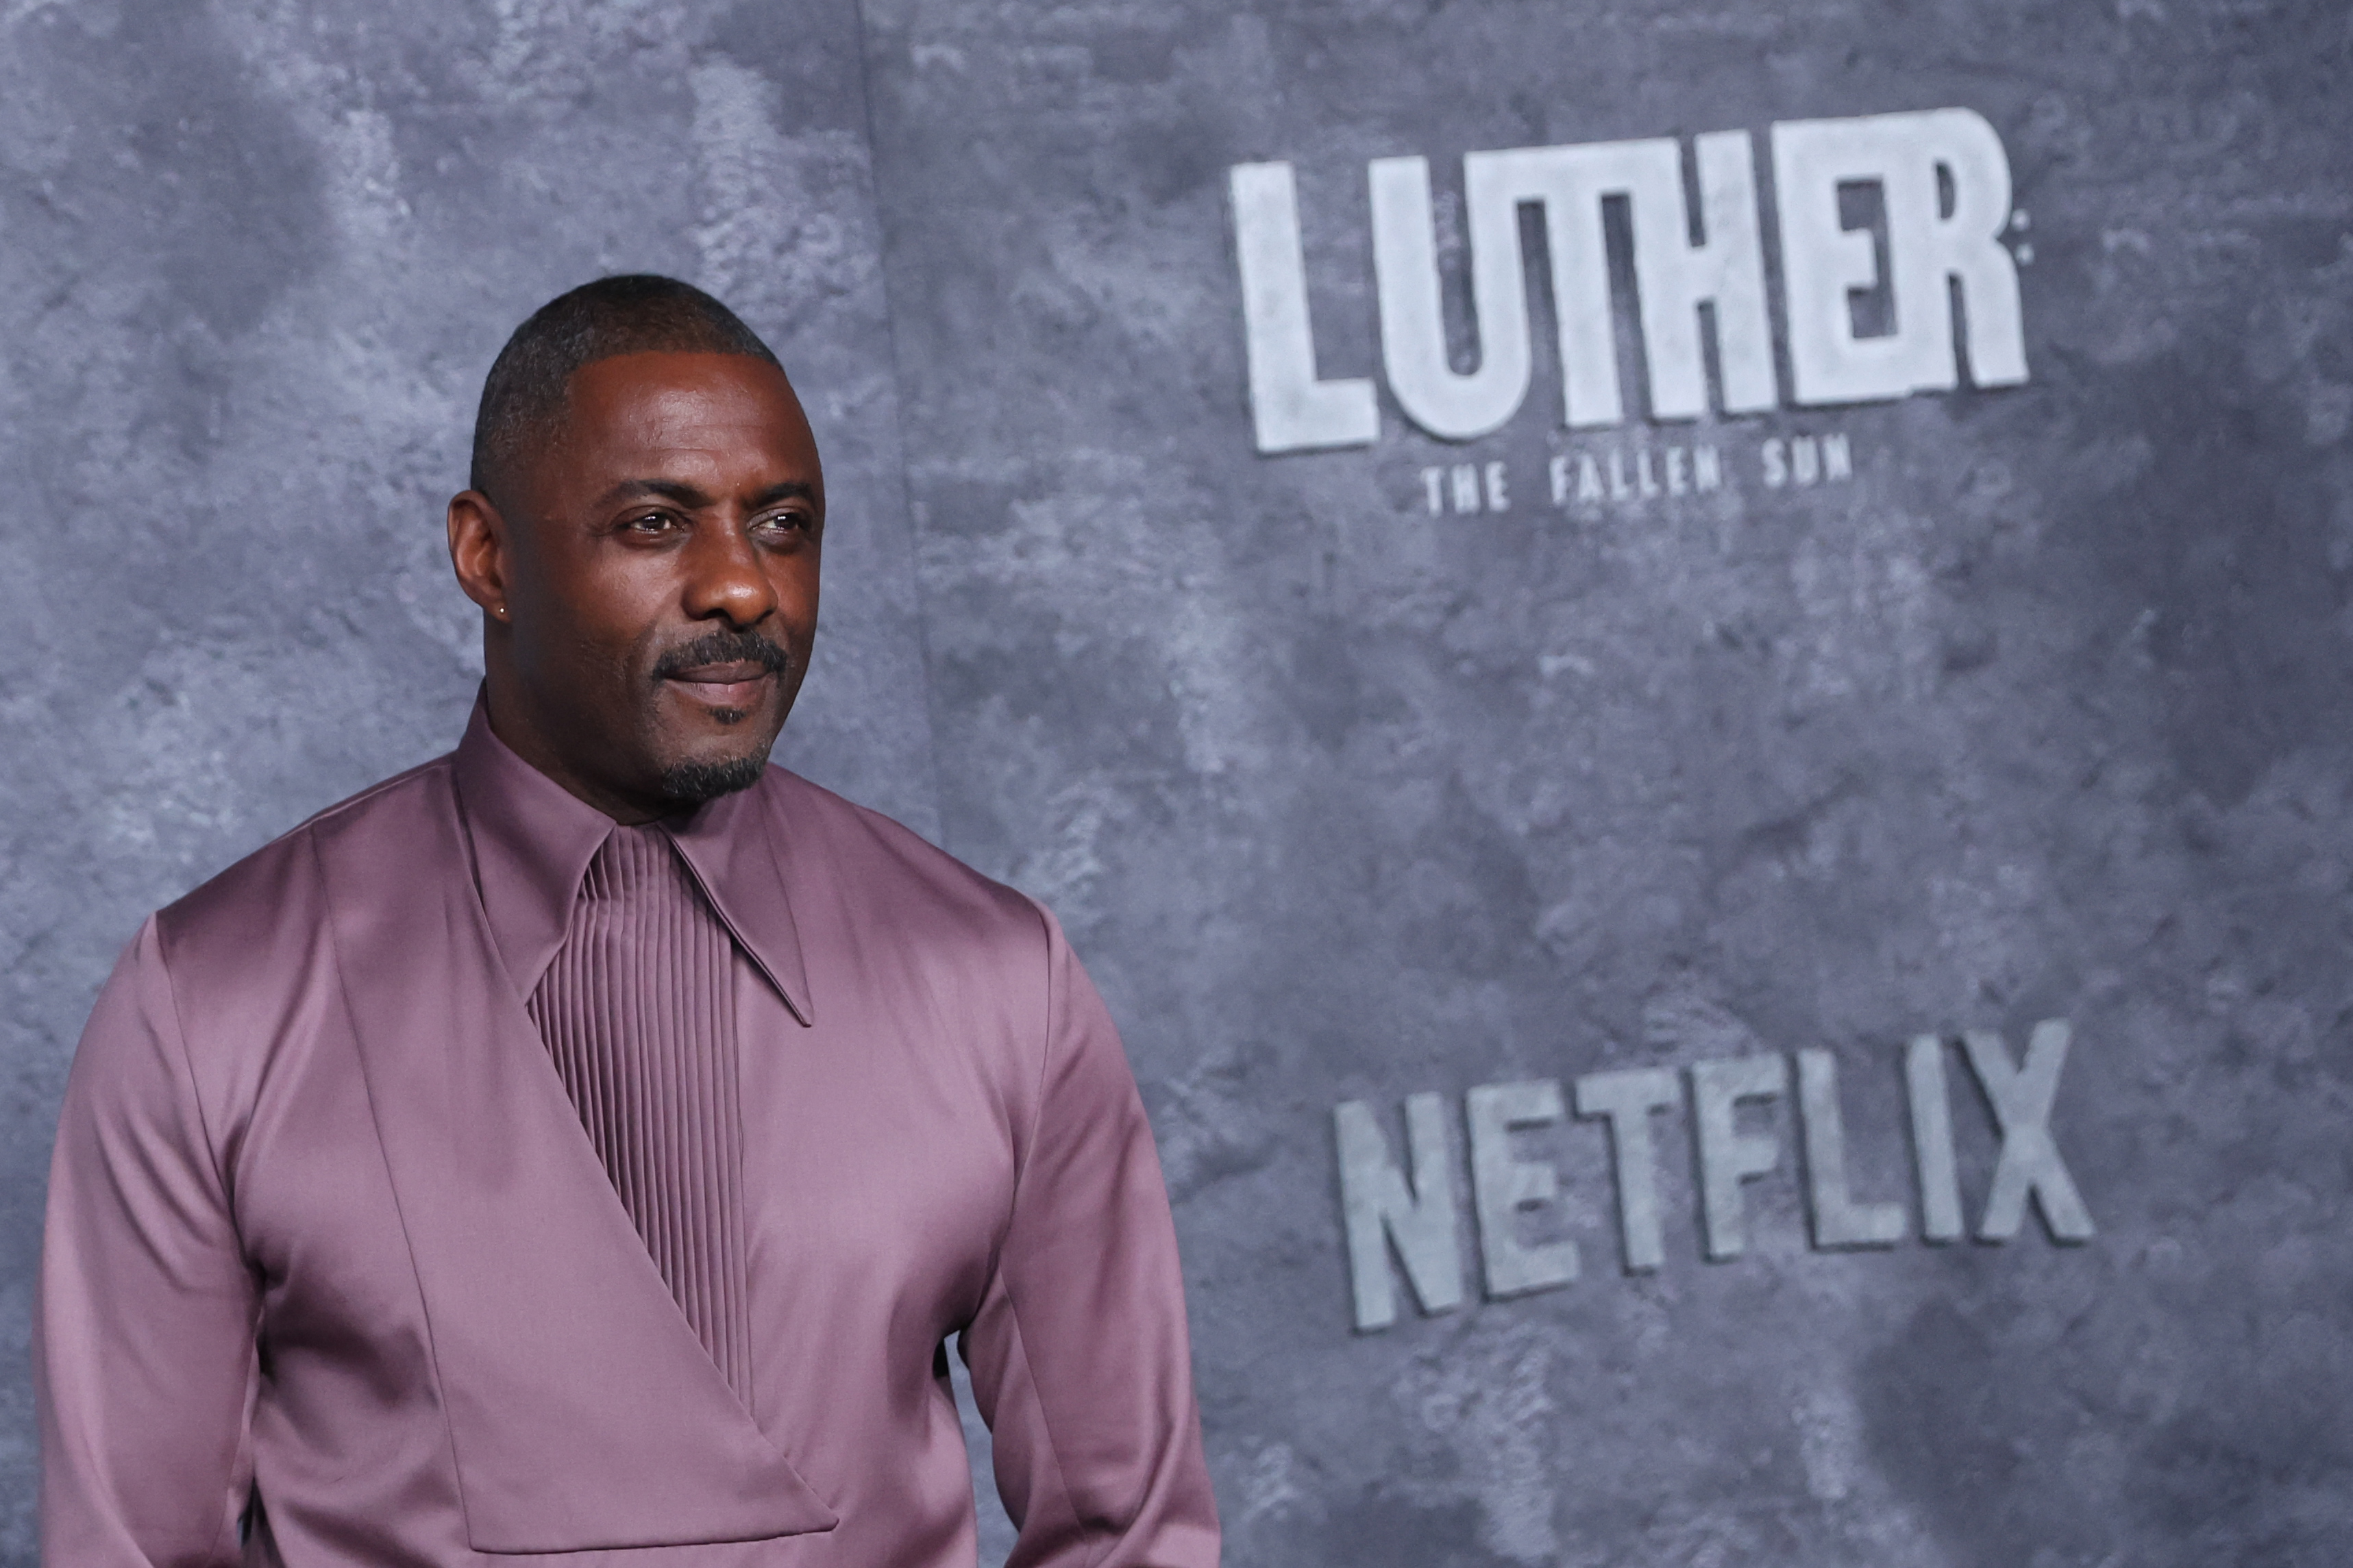 Idris Elba attends the premiere of "Luther: The Fallen Sun" on March 1, 2023 | Source: Getty Images